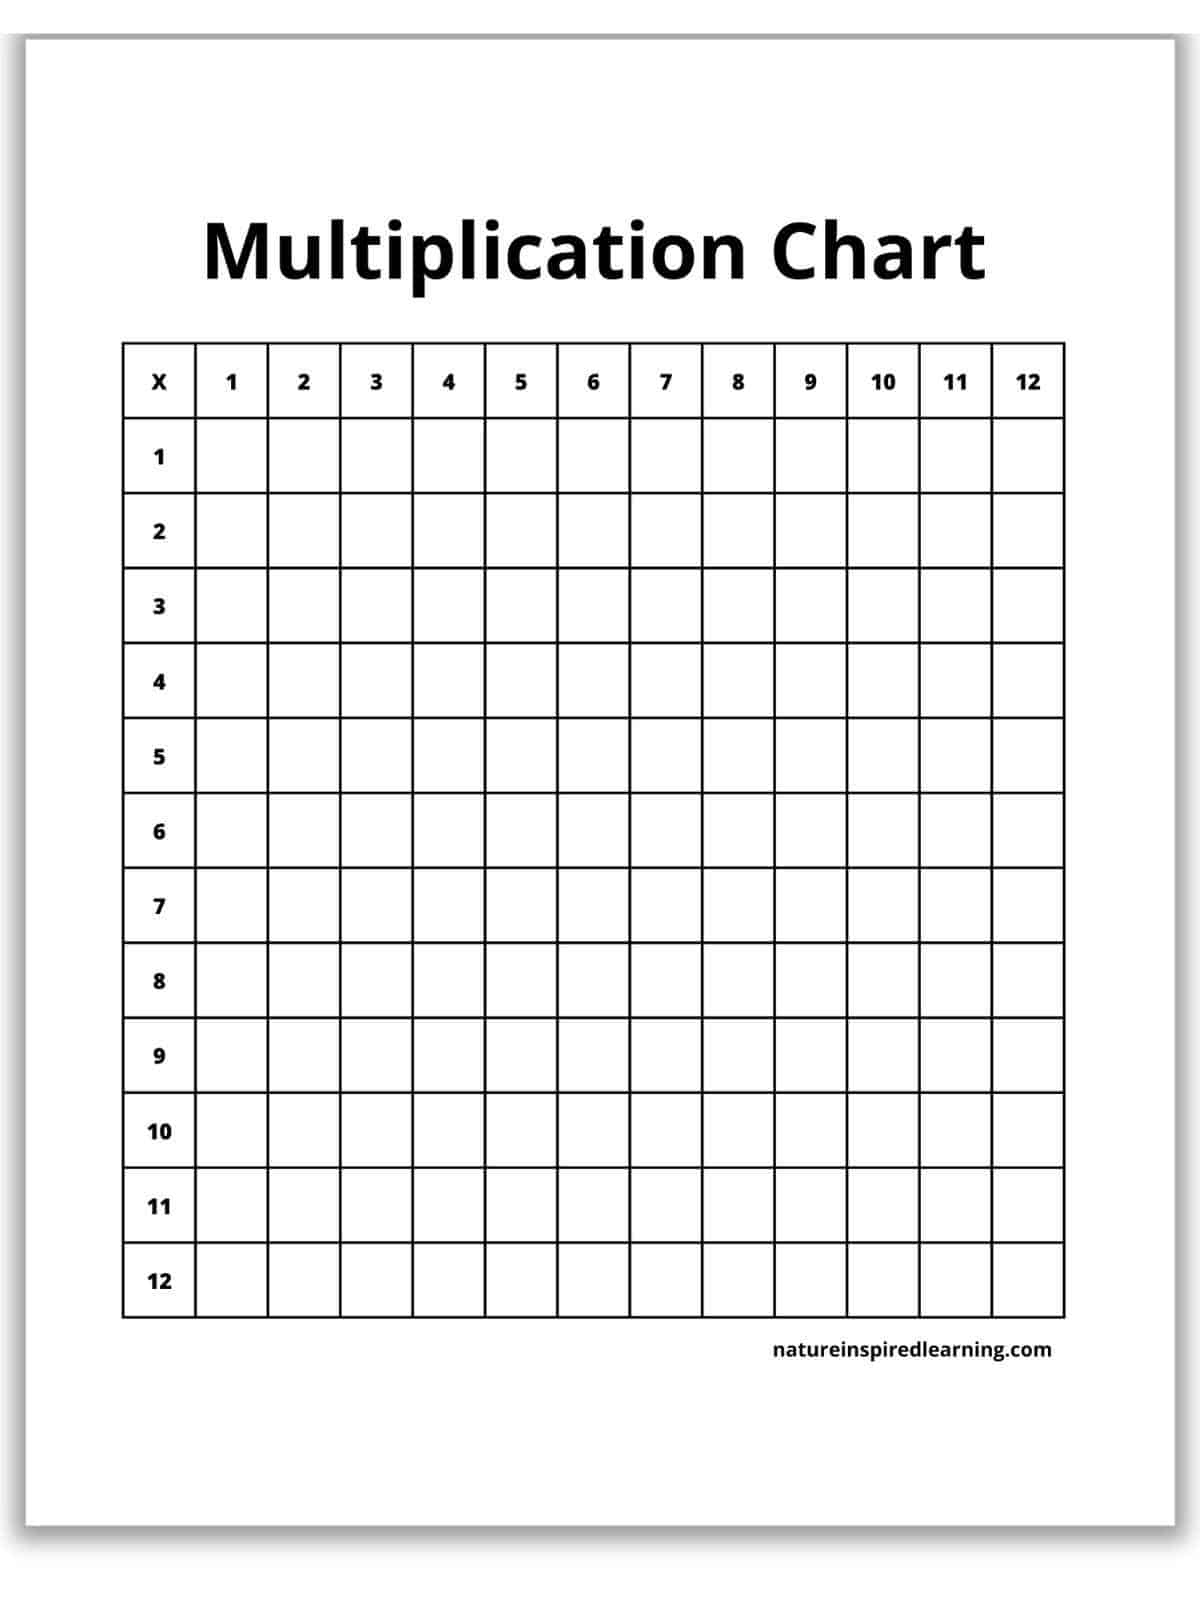 basic black and white blank multiplication chart with easy to read text and numbers